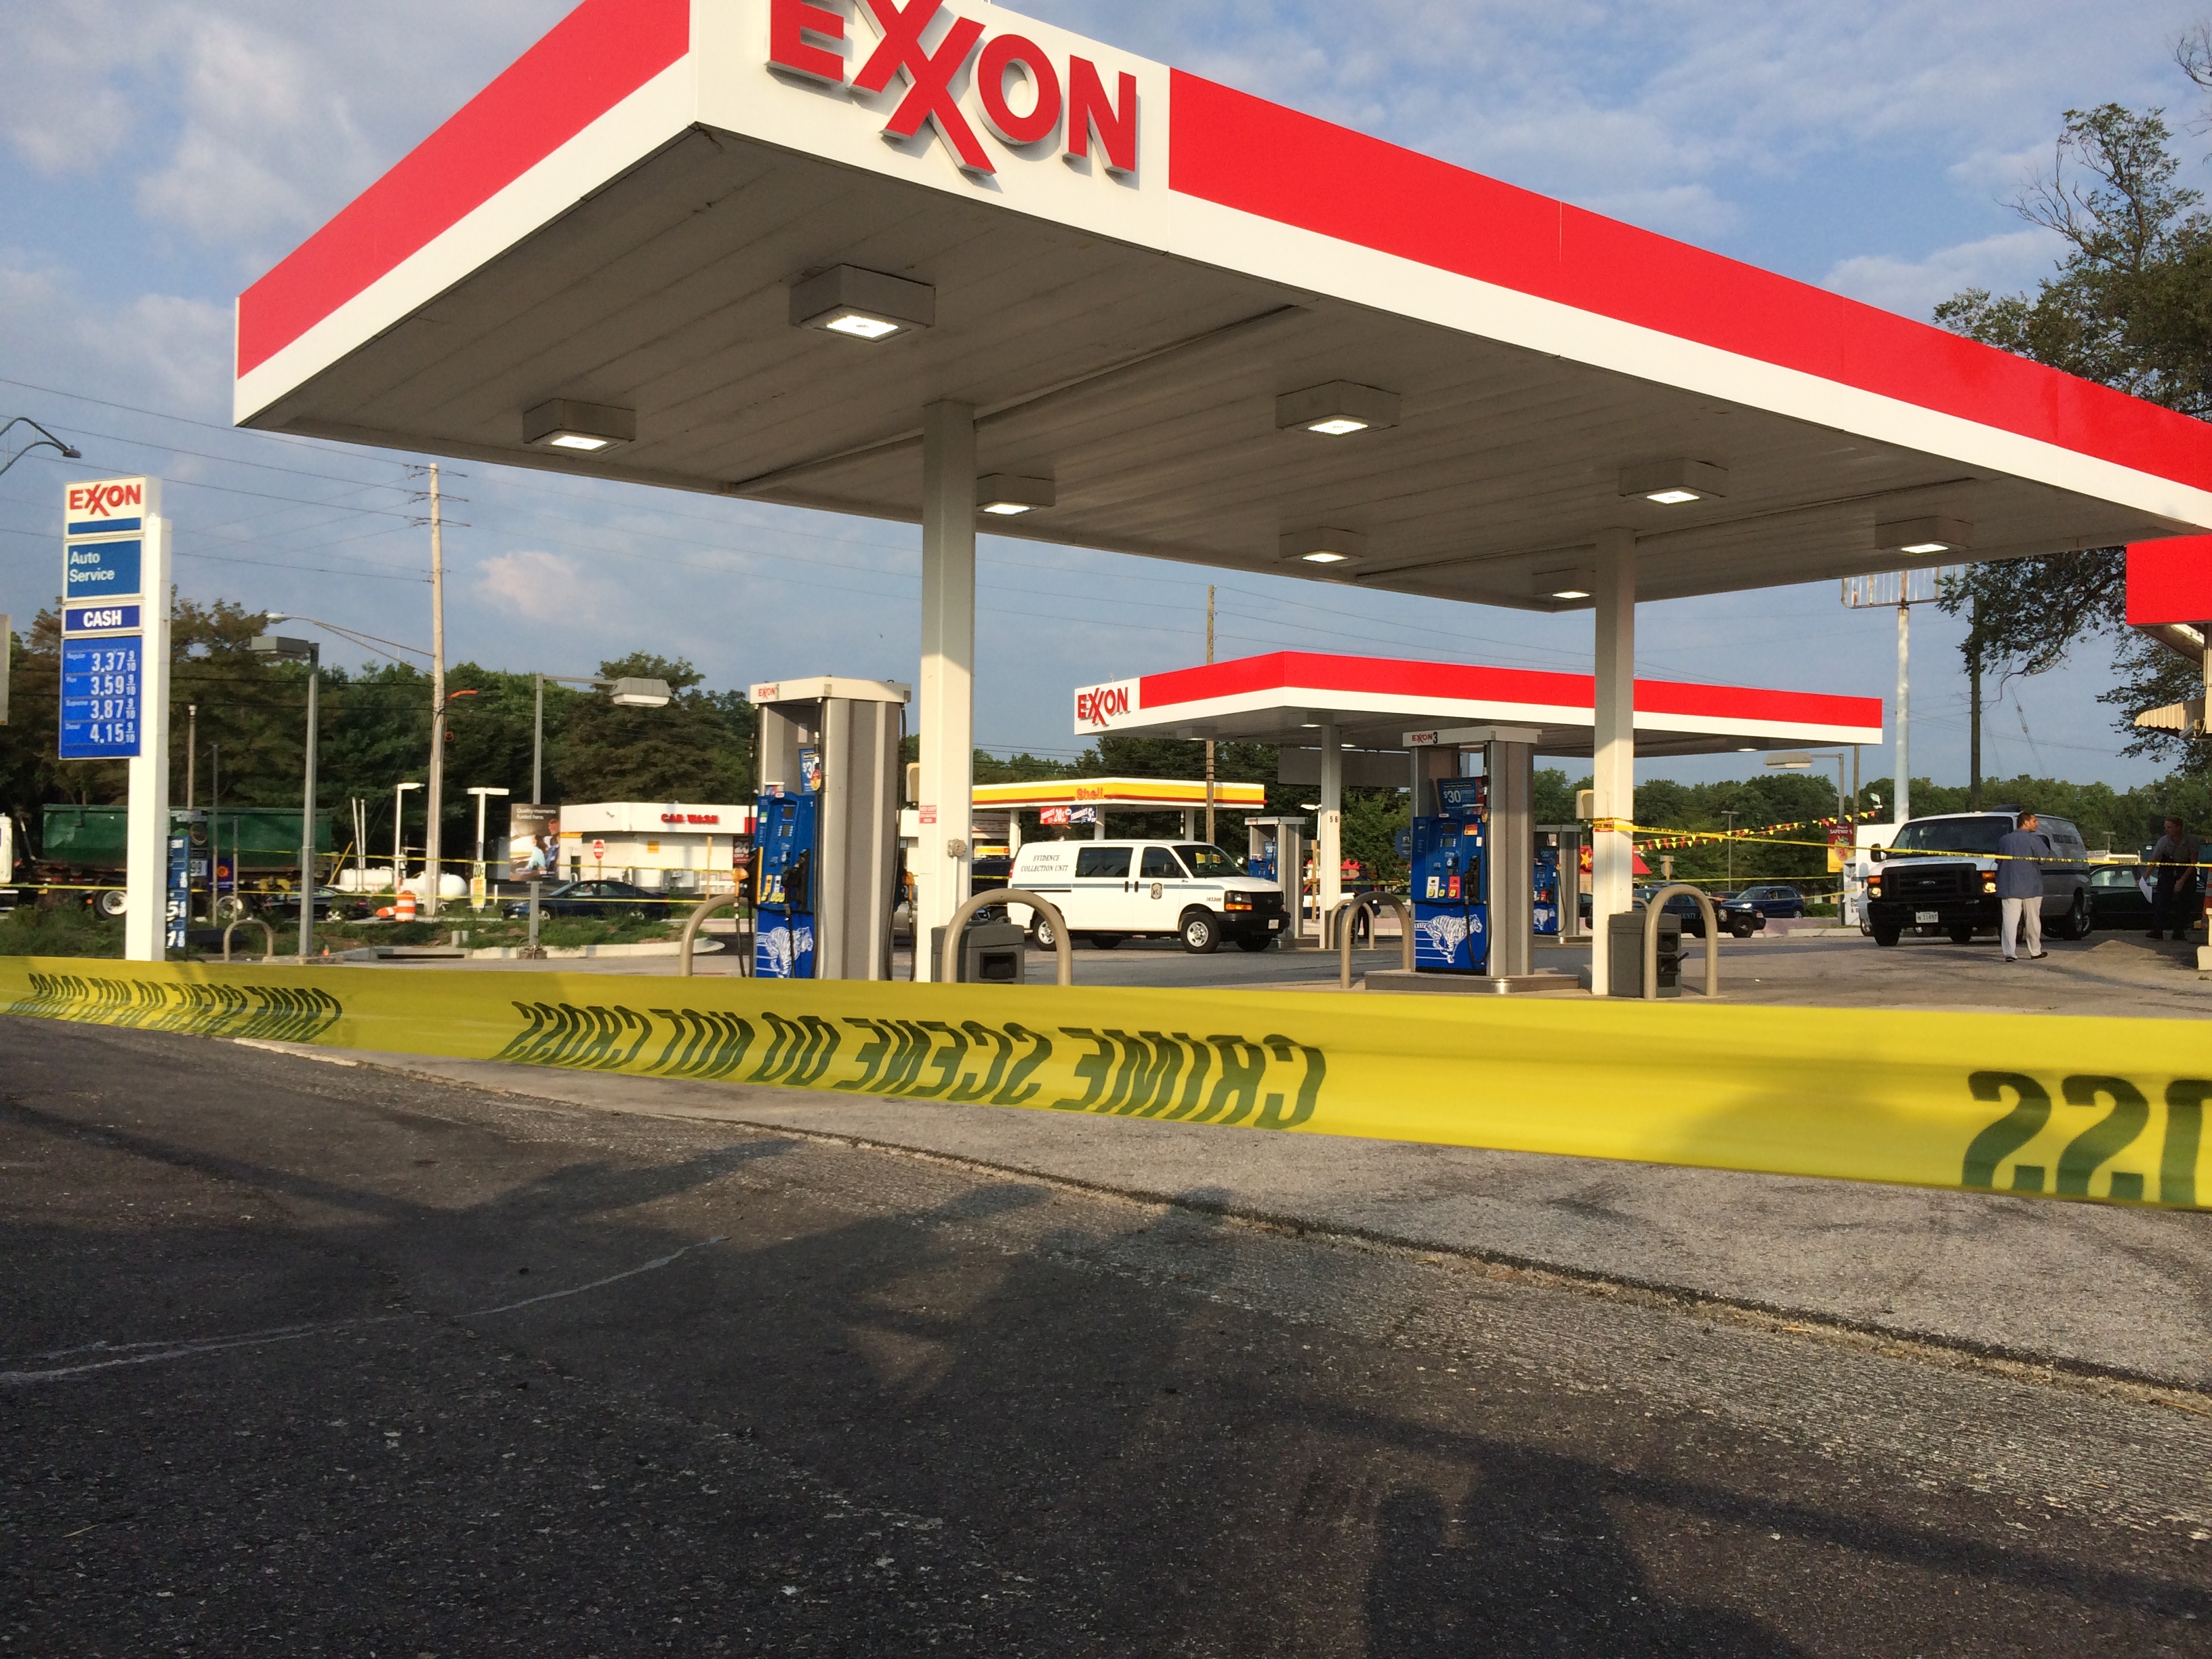 Gas station clerk shot, killed in Anne Arundel County; shooter at large